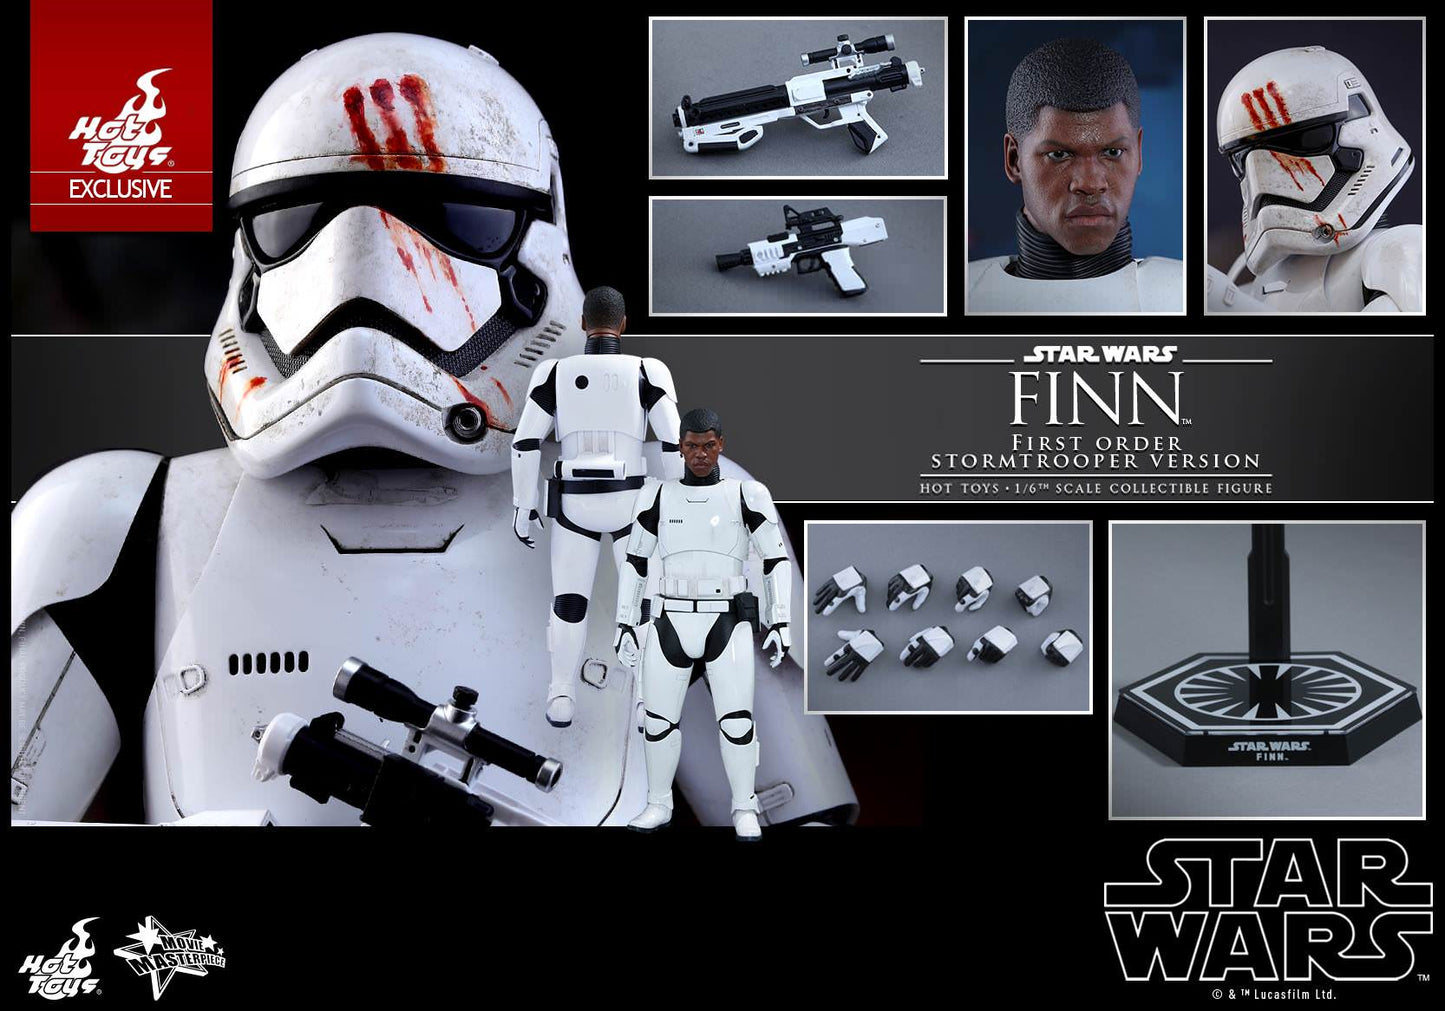 Finn Stormtrooper Version Exclusive 1/6 - Star Wars: The Force Awakens Hot Toys